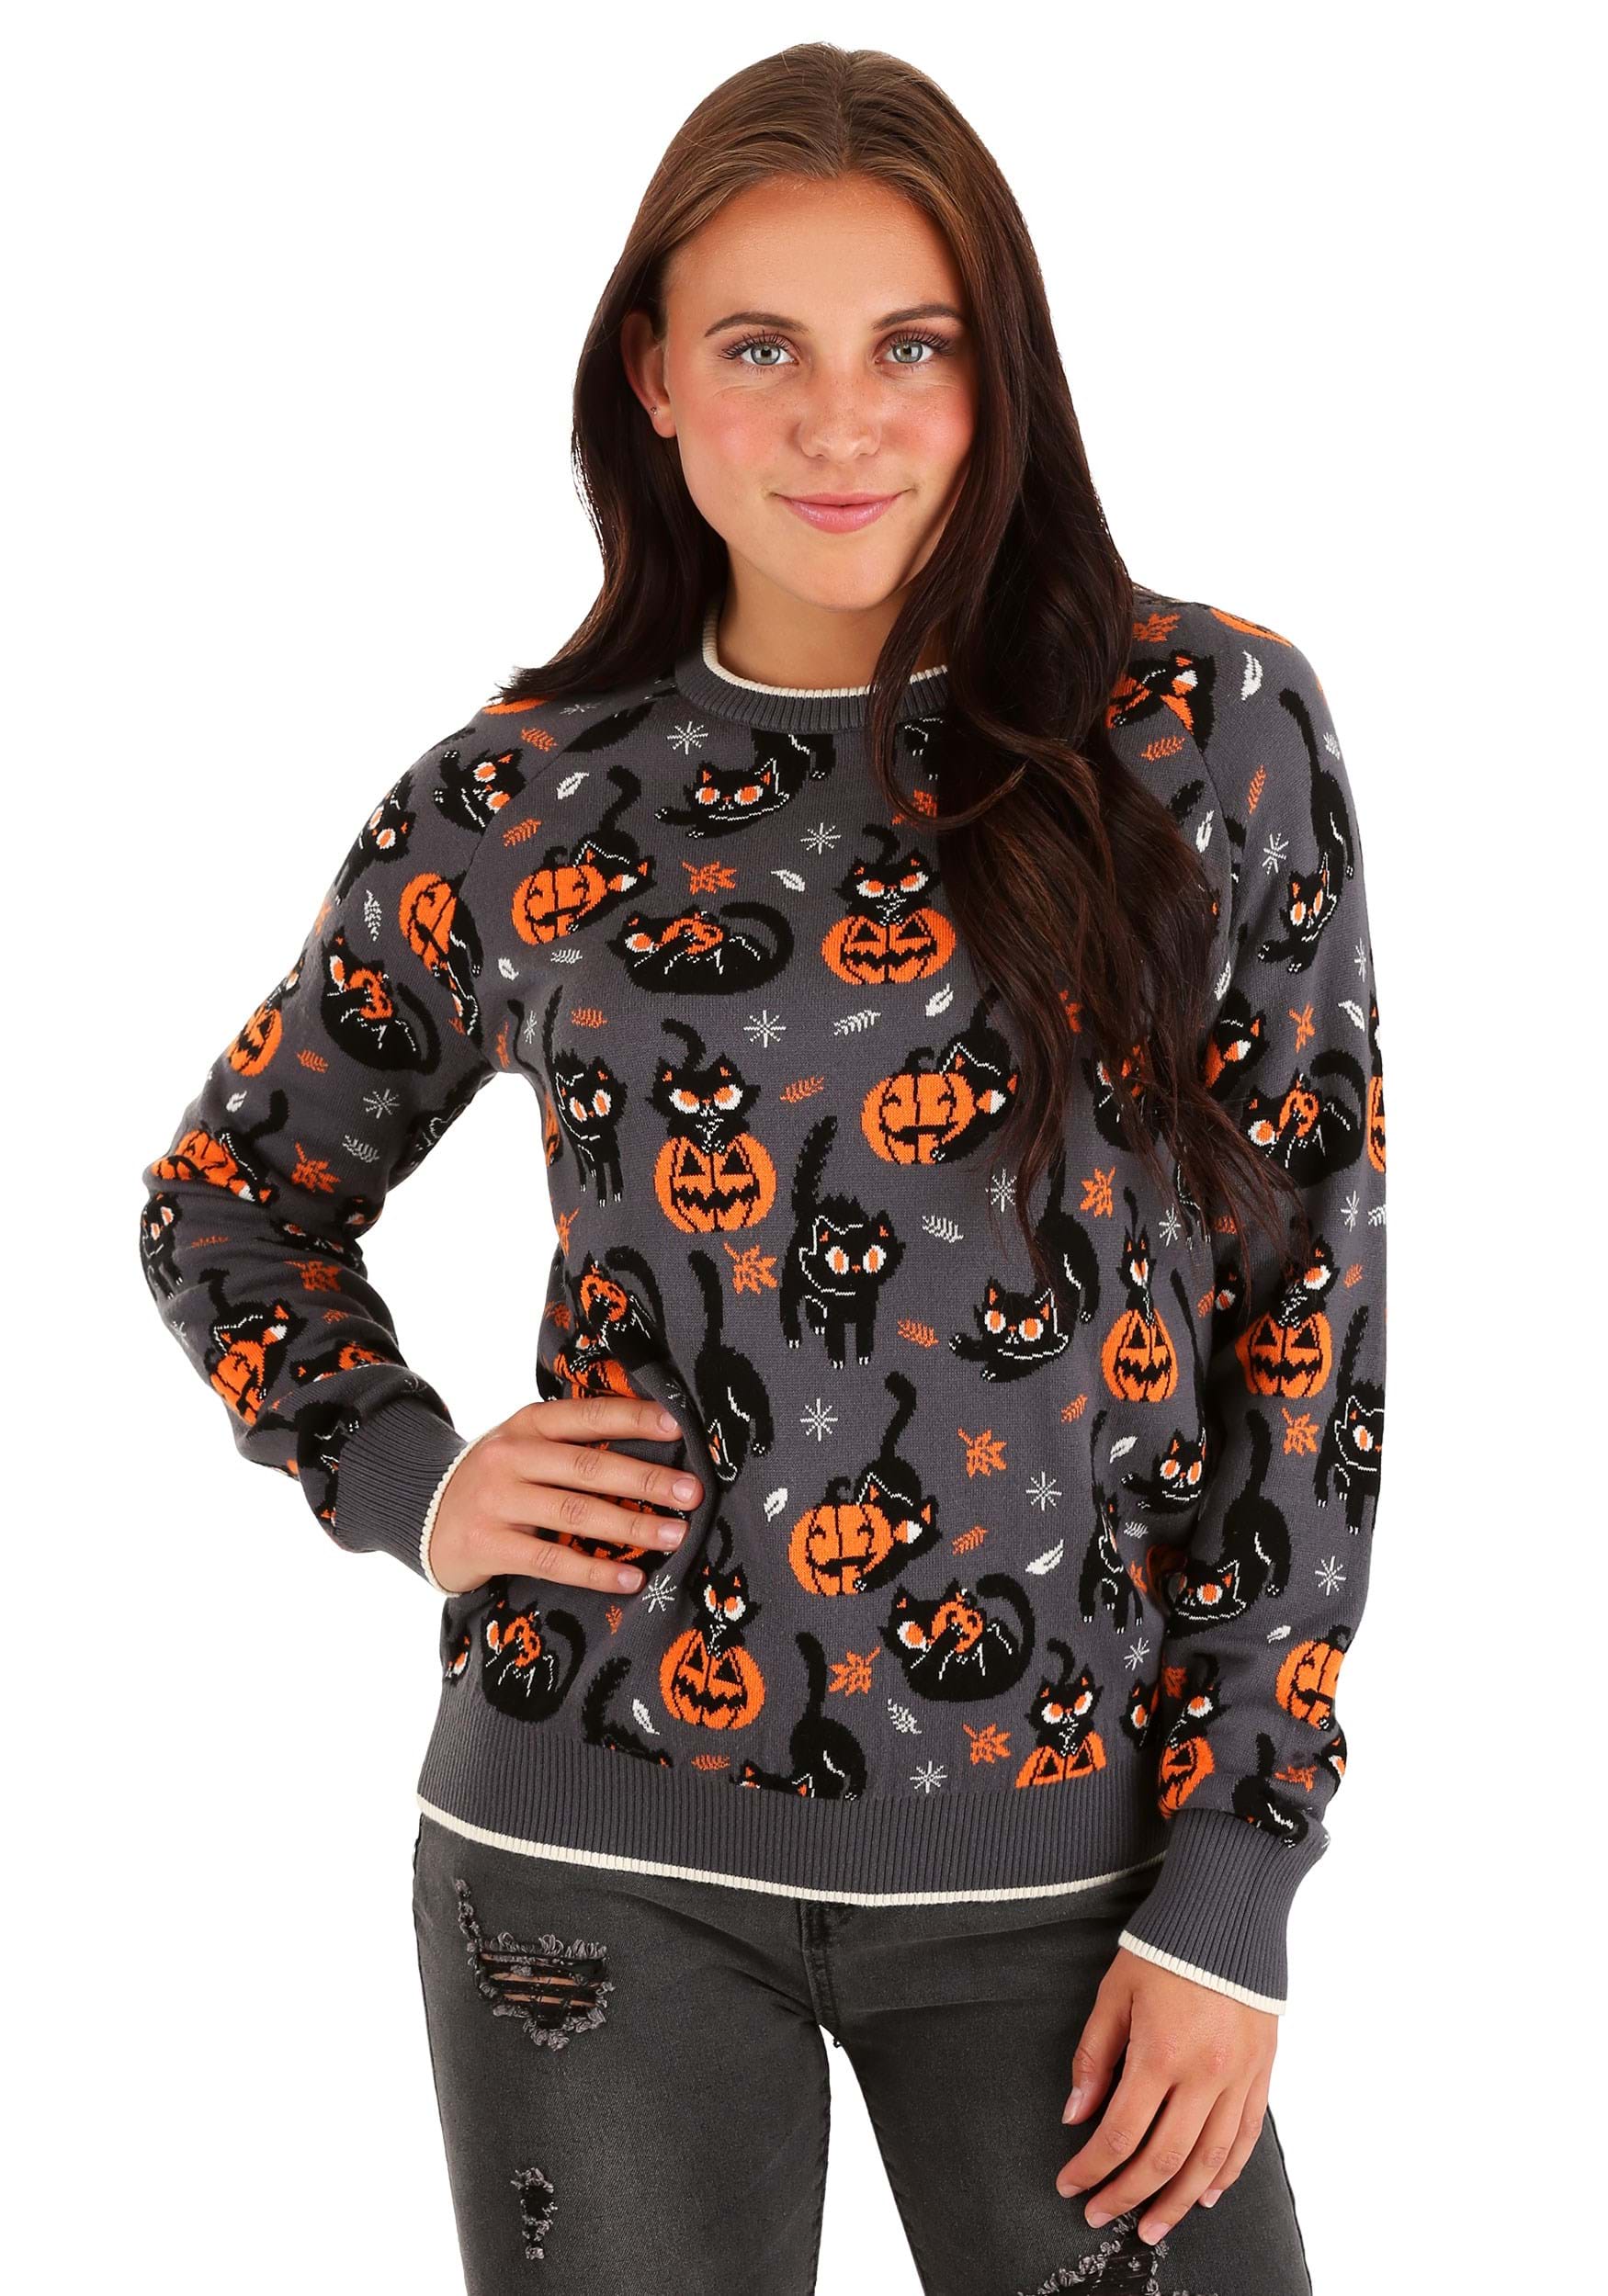 Quirky Kitty Ugly Halloween Sweater for Adults